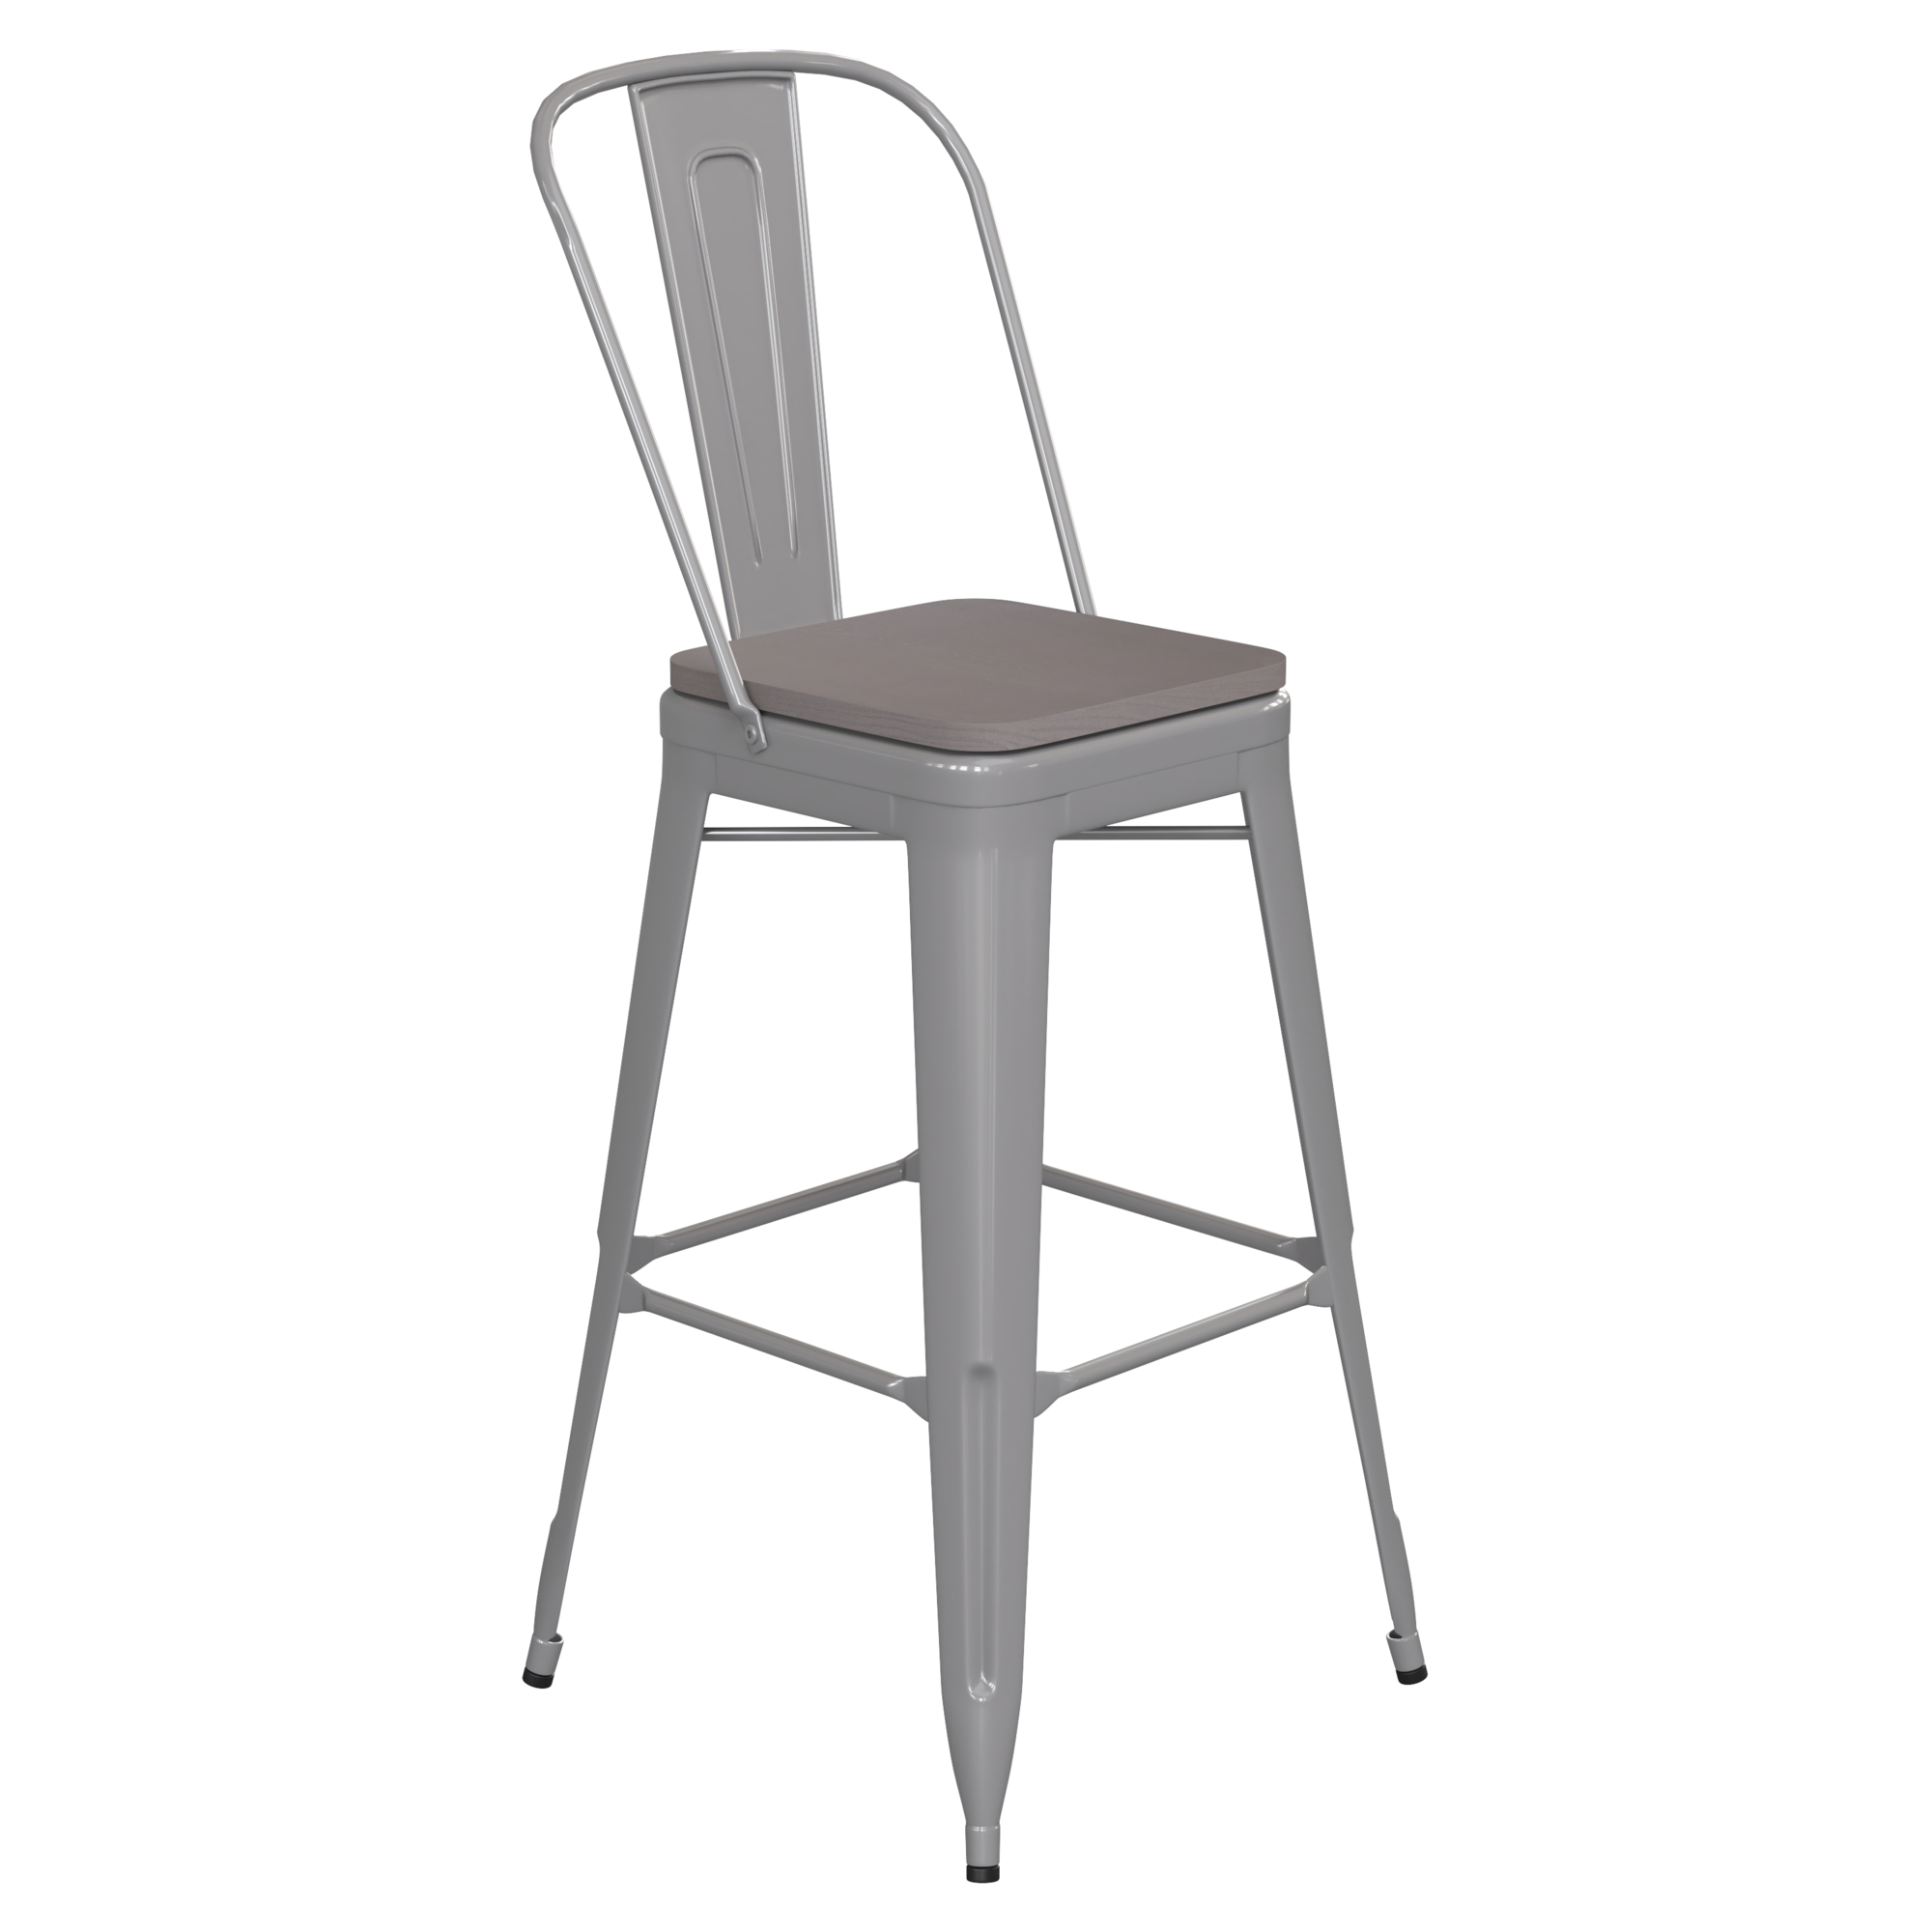 Flash Furniture, 30Inch Silver Metal Counter Stool-Gray Poly Seat, Primary Color Gray, Included (qty.) 1, Model CH3132030GSLP2G